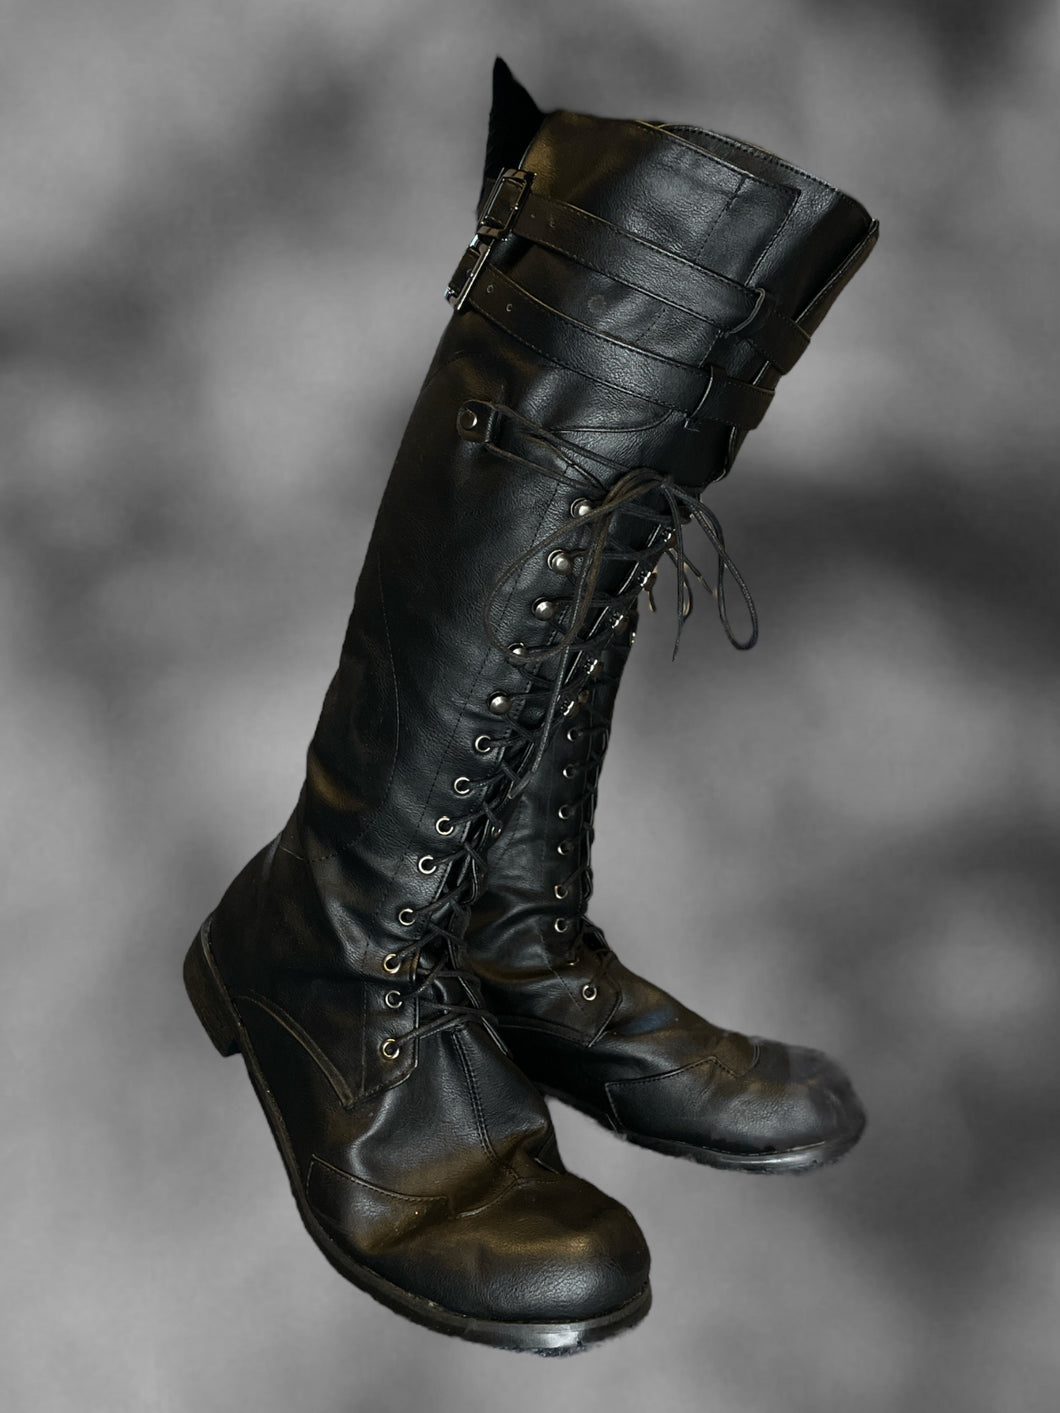 14 Black lace-up knee high combat boots w/ buckle detail, & fleece lining